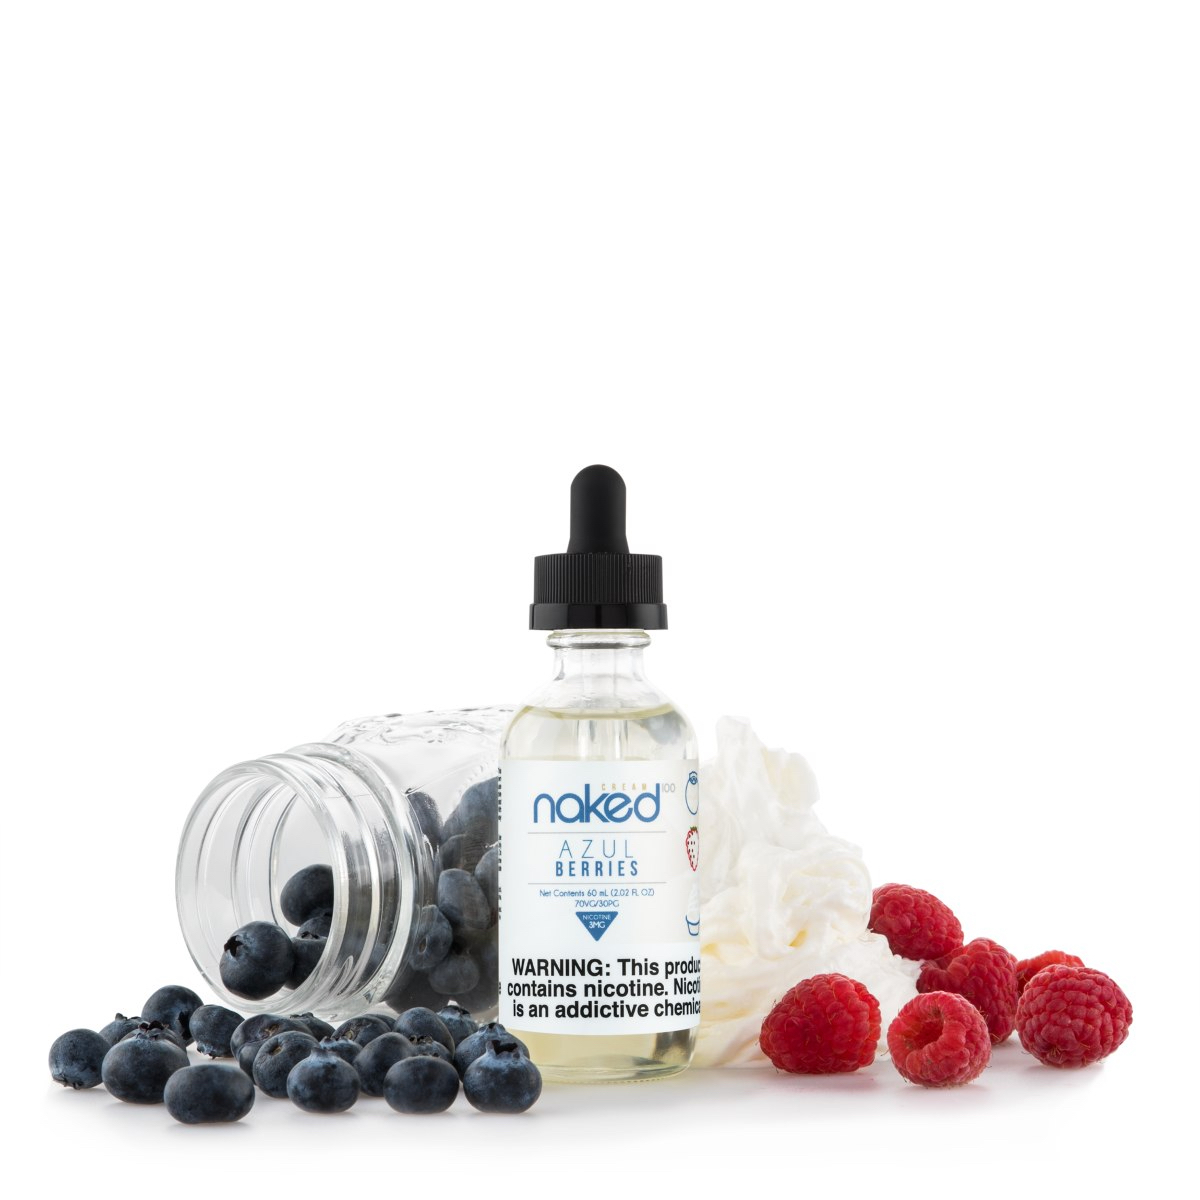 Naked 100 Very Berry E-Liquid | Blueberry, Blackberry, and 